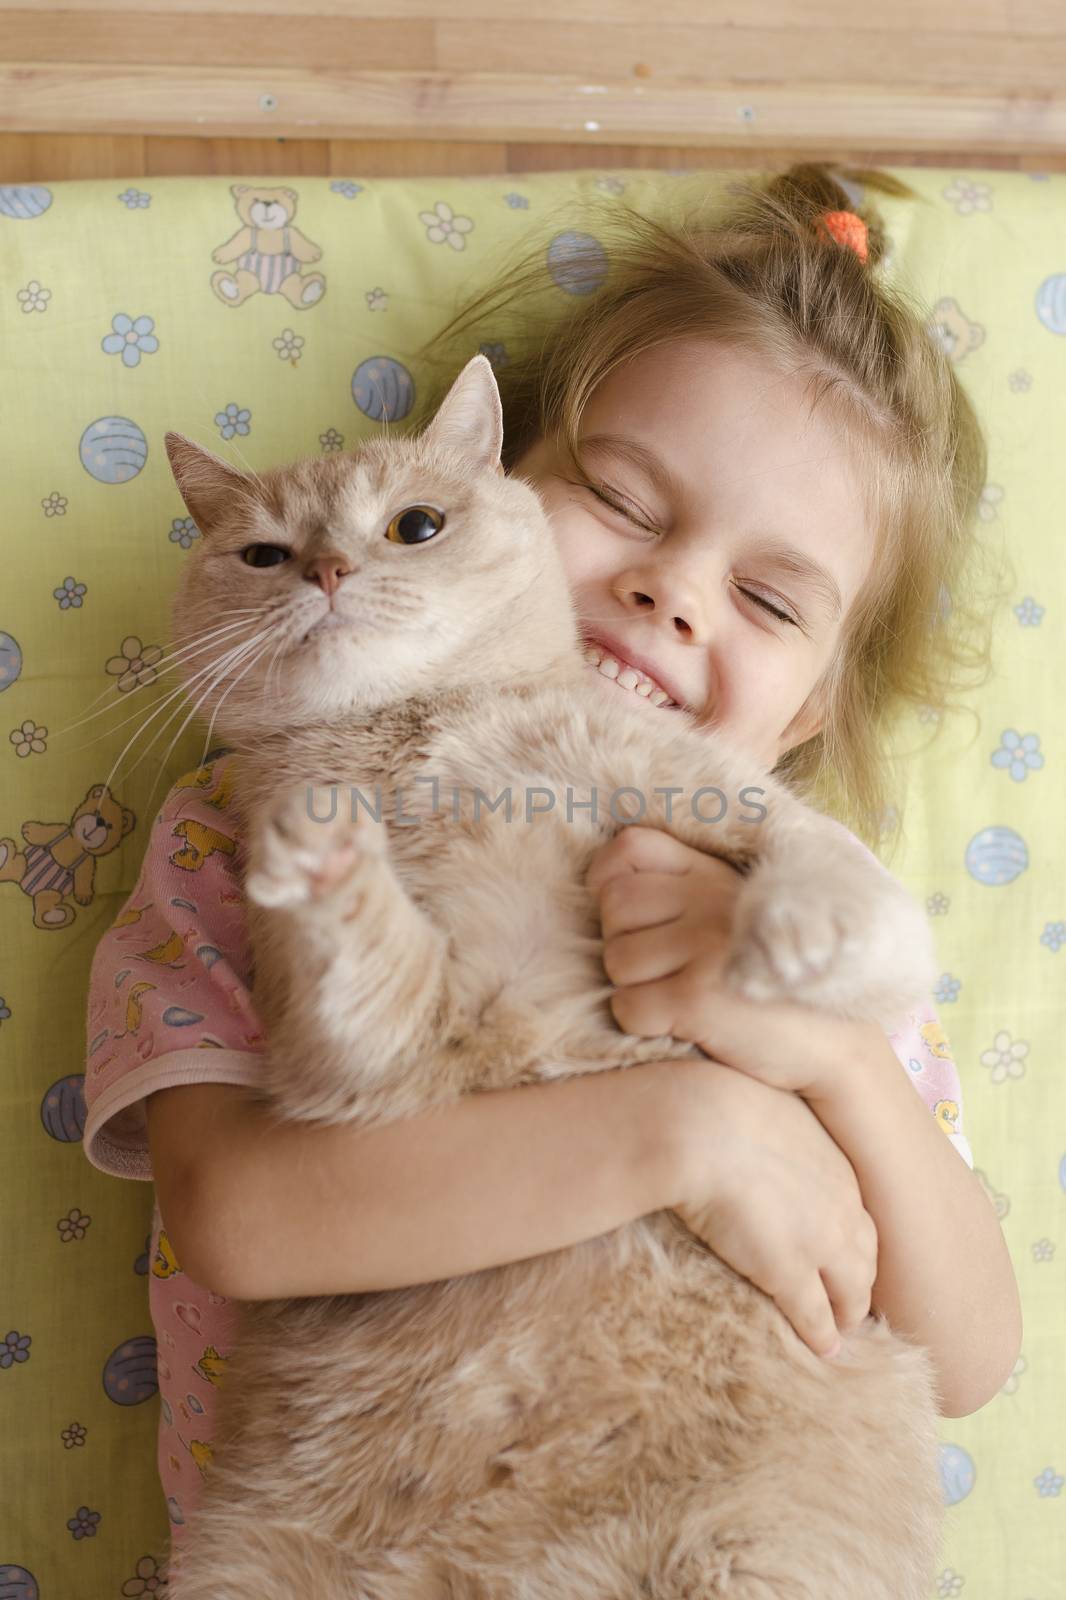 The little girl hugging the cat lying on a mattress on the floor. The girl smiles. He tries to escape